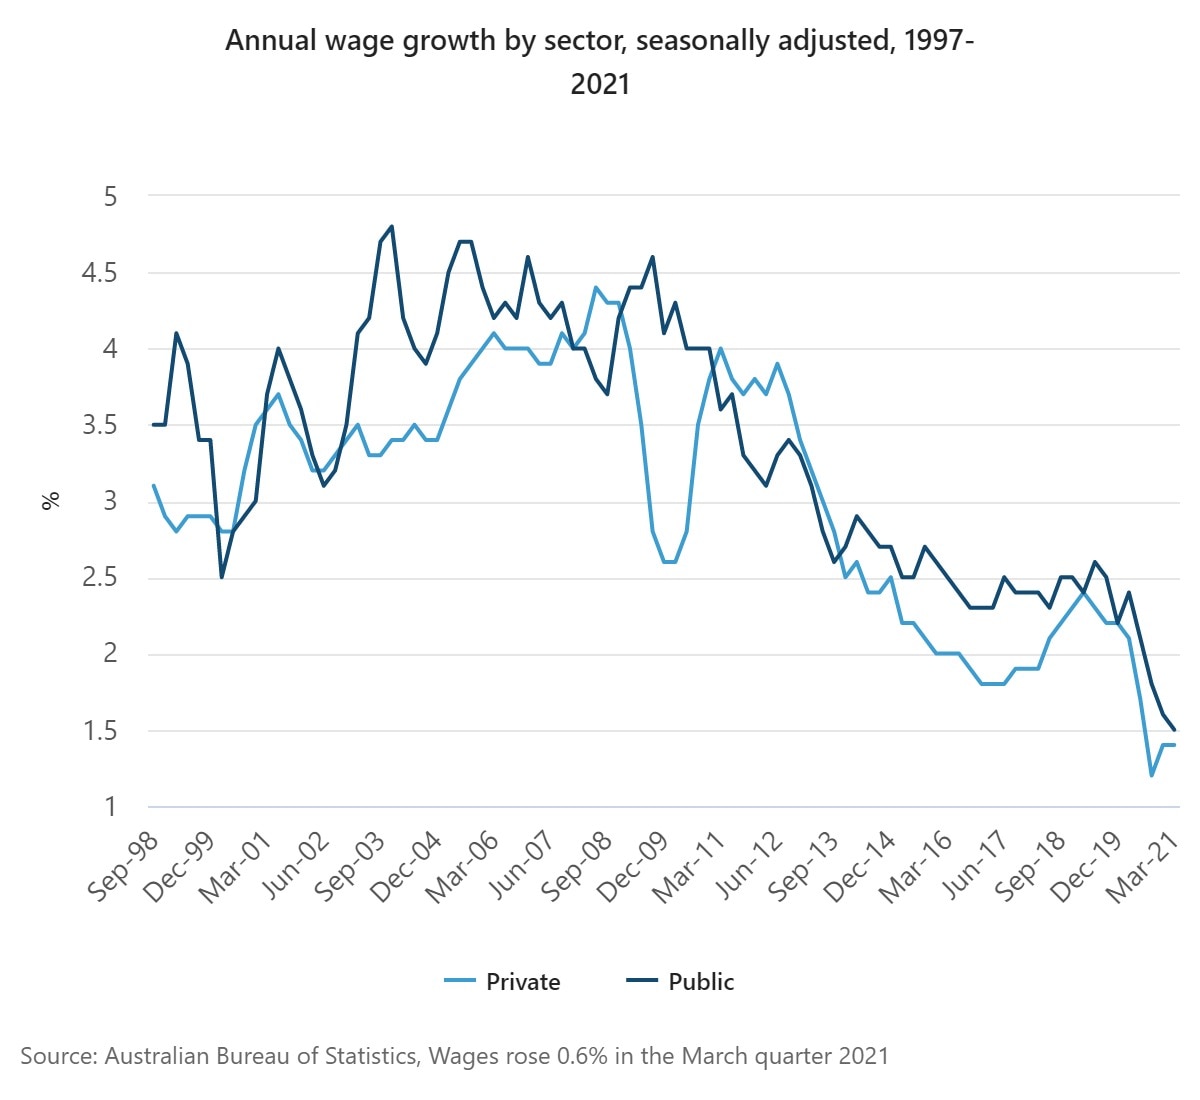 Wages growth edges higher, but weighed down by public sector pay